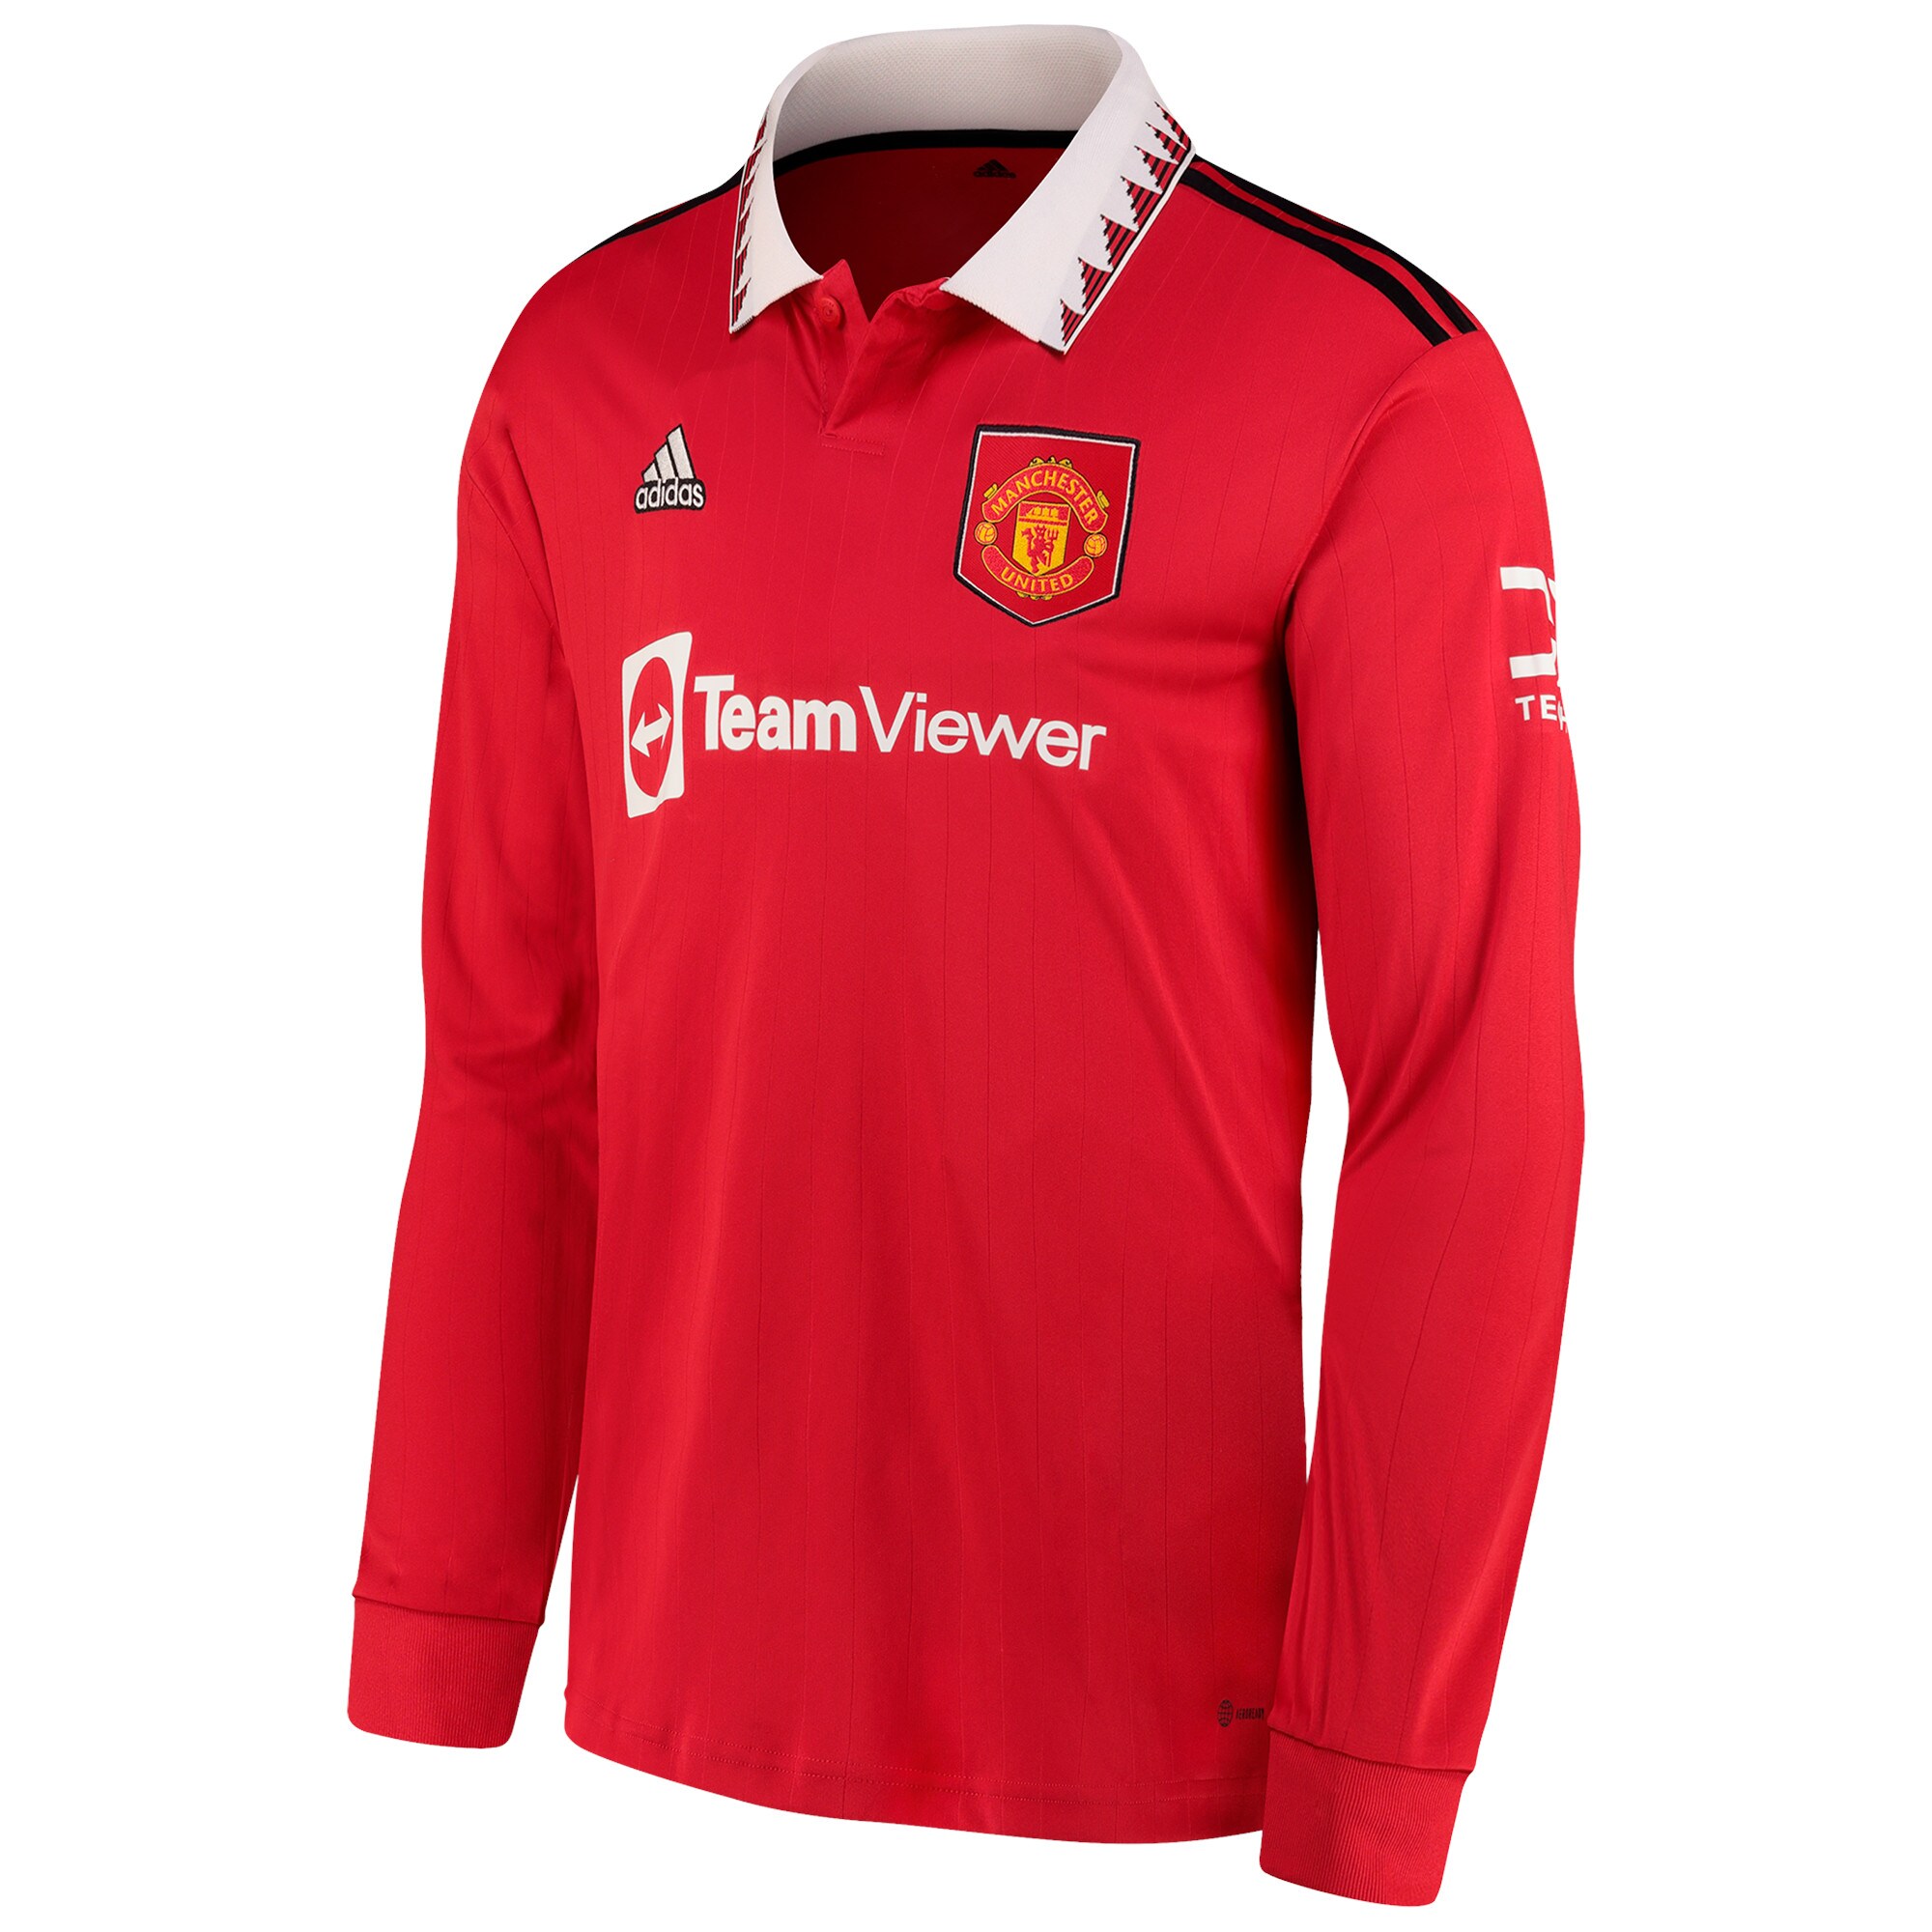 Manchester United Cup Home Shirt 2022-23 - Long Sleeve with Malacia 12 printing